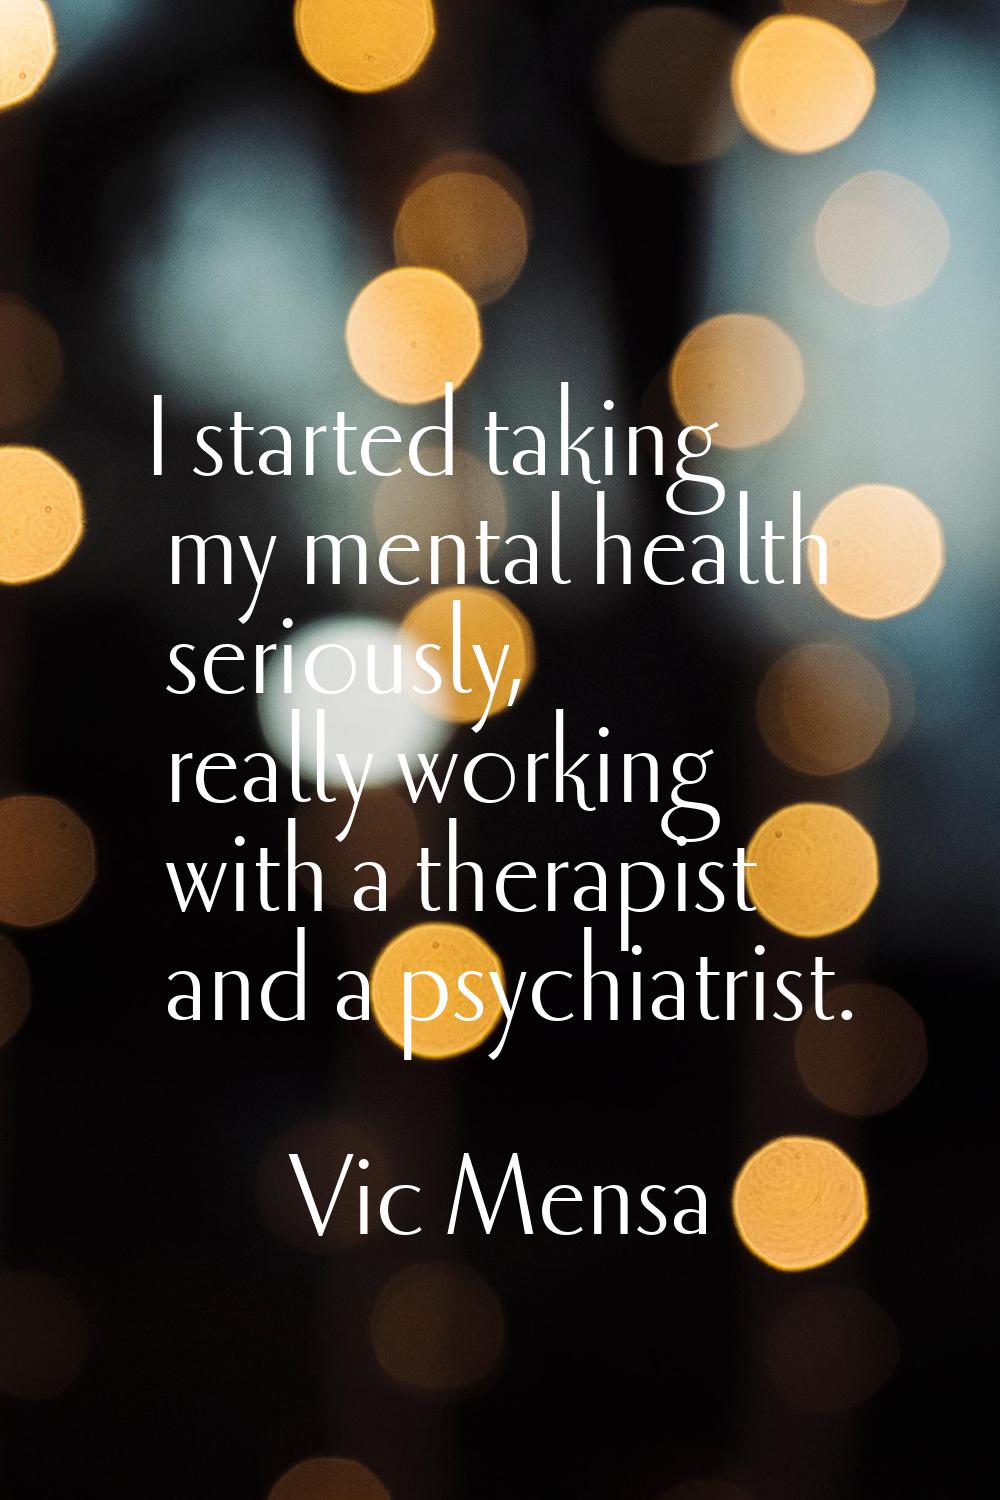 I started taking my mental health seriously, really working with a therapist and a psychiatrist.